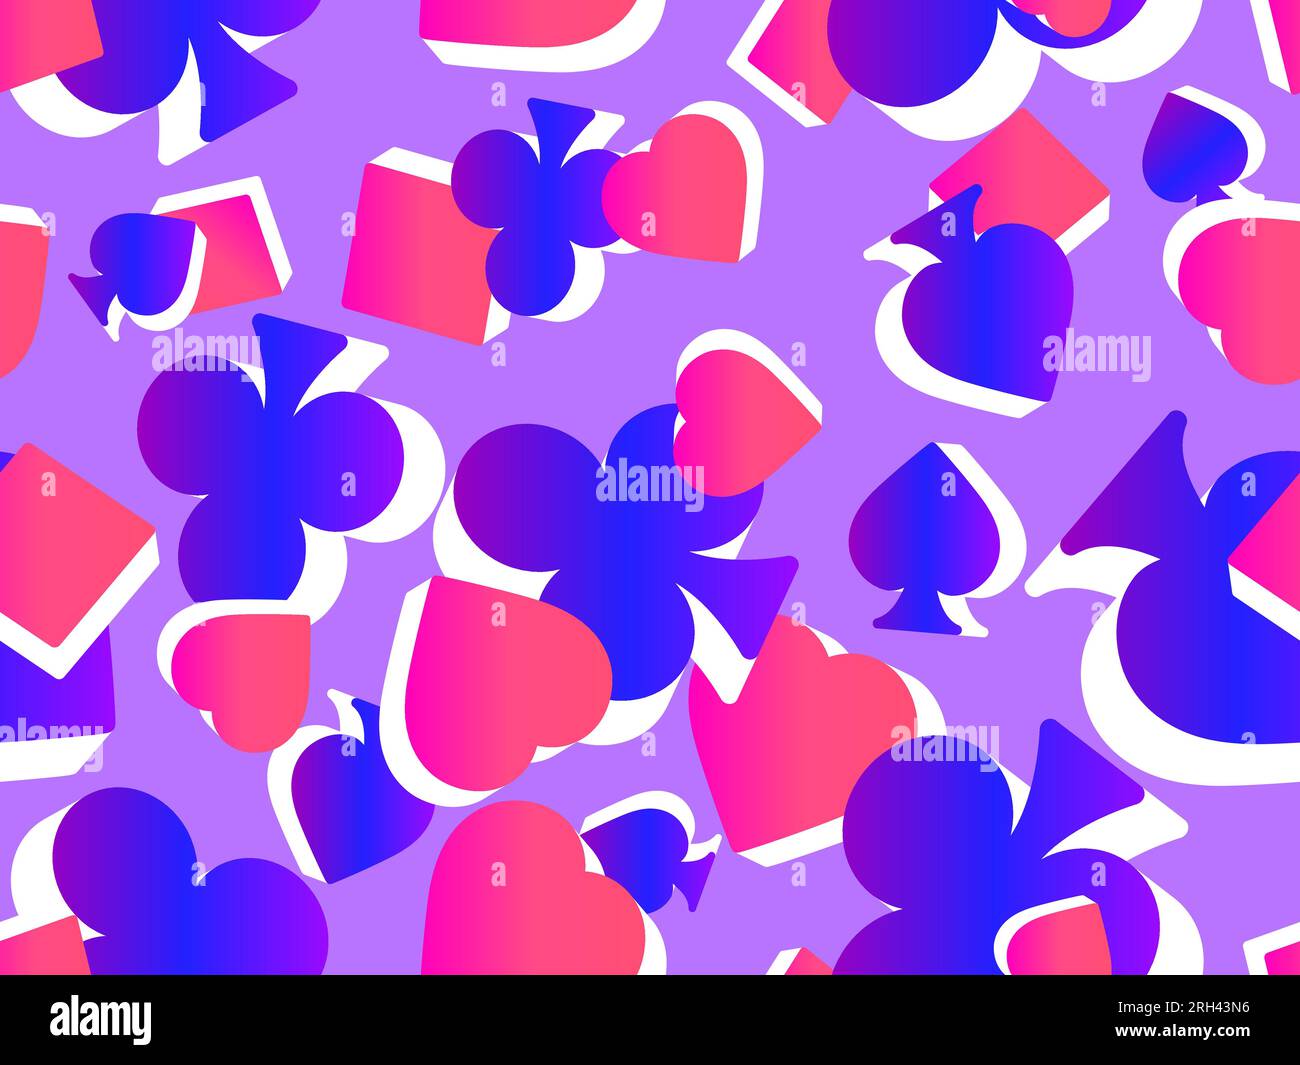 Seamless pattern with card suits: diamonds, hearts, clubs, spades in 3d ...